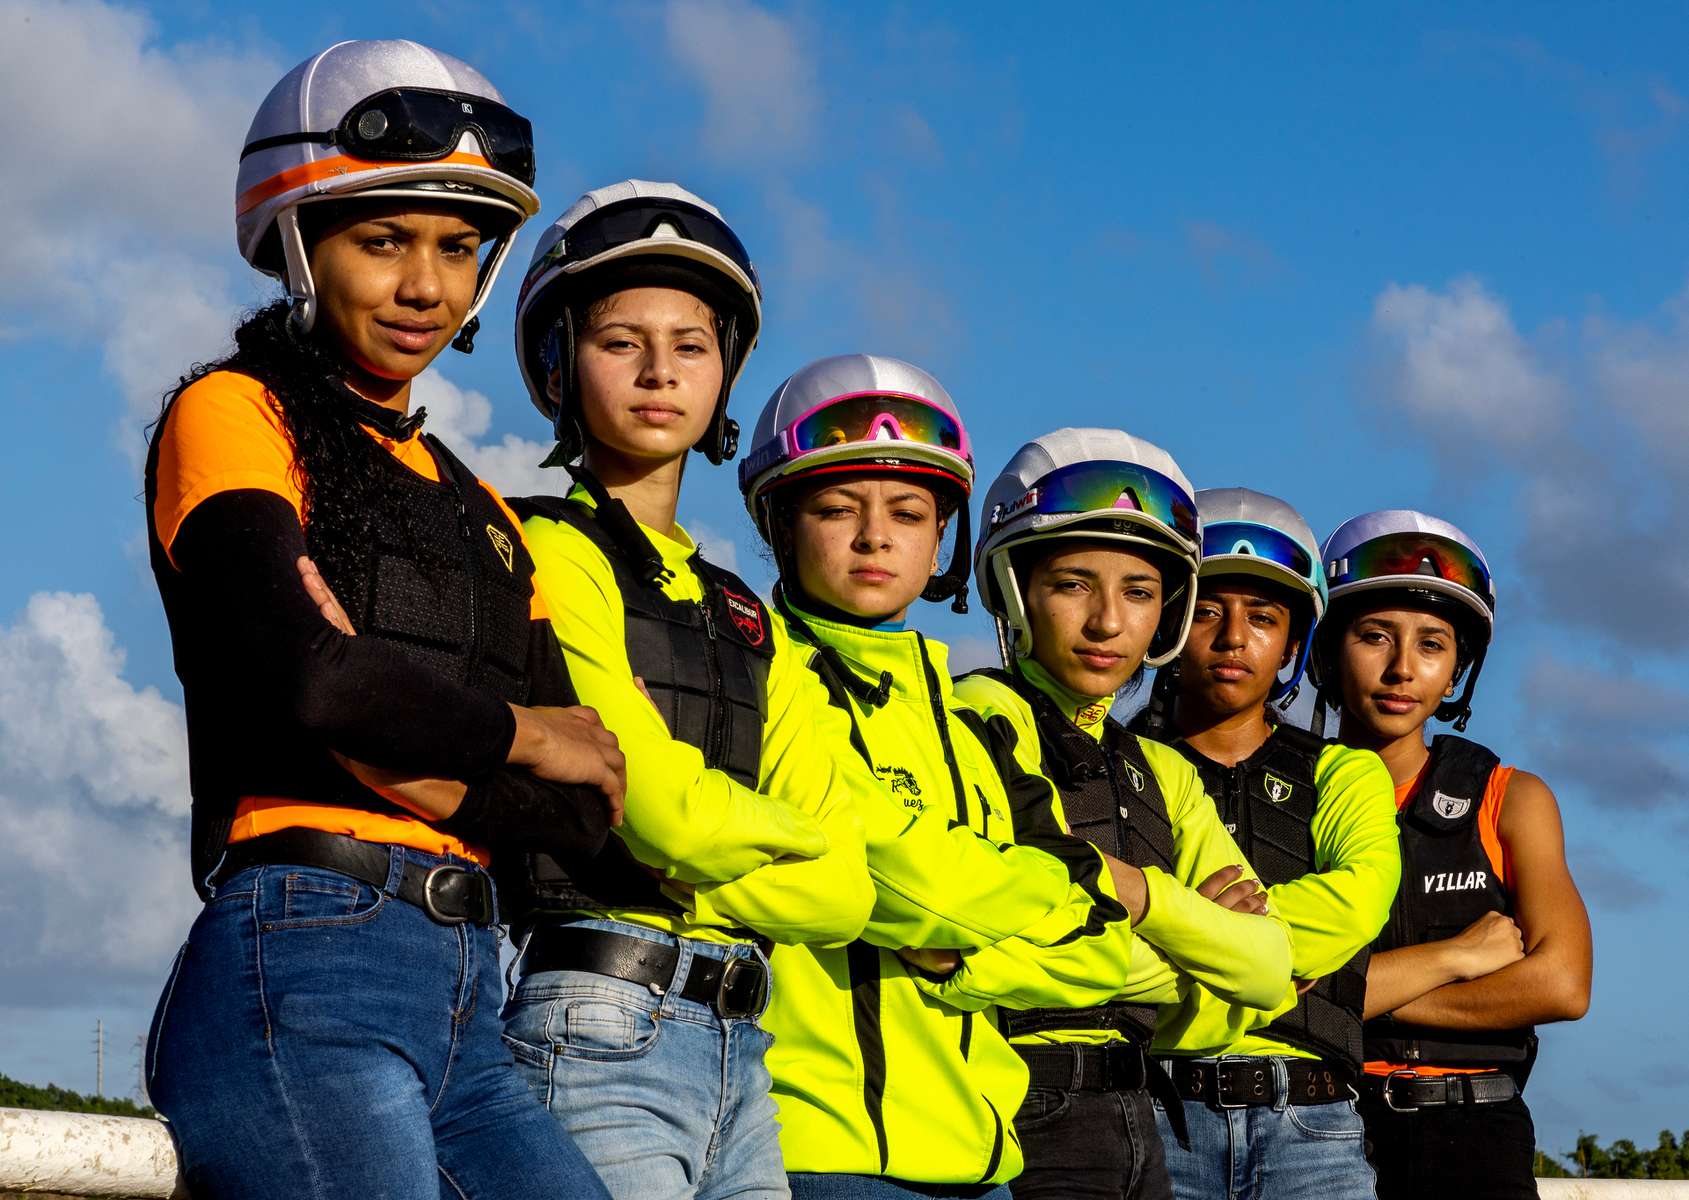 From (L-R) Student Exercise Riders and Student Jockeys Kiara Melendez, Yalexamarie Cintron, Elbaliz Rodriguez, Valeria Melendez, Jolines Ramos, and Valeria Acevedo pose for a portrait on the main racetrack at the Vocational Equestrian Agustín Mercado Reverón School located in the Hipódromo Camarero on November 16, 2022 in Canovanas, Puerto Rico. The Vocational Equestrian Agustín Mercado Reverón School has produced some of the best jockeys in the world but also prepares students for a wide range of equestrian jobs on a tuition-free basis. 